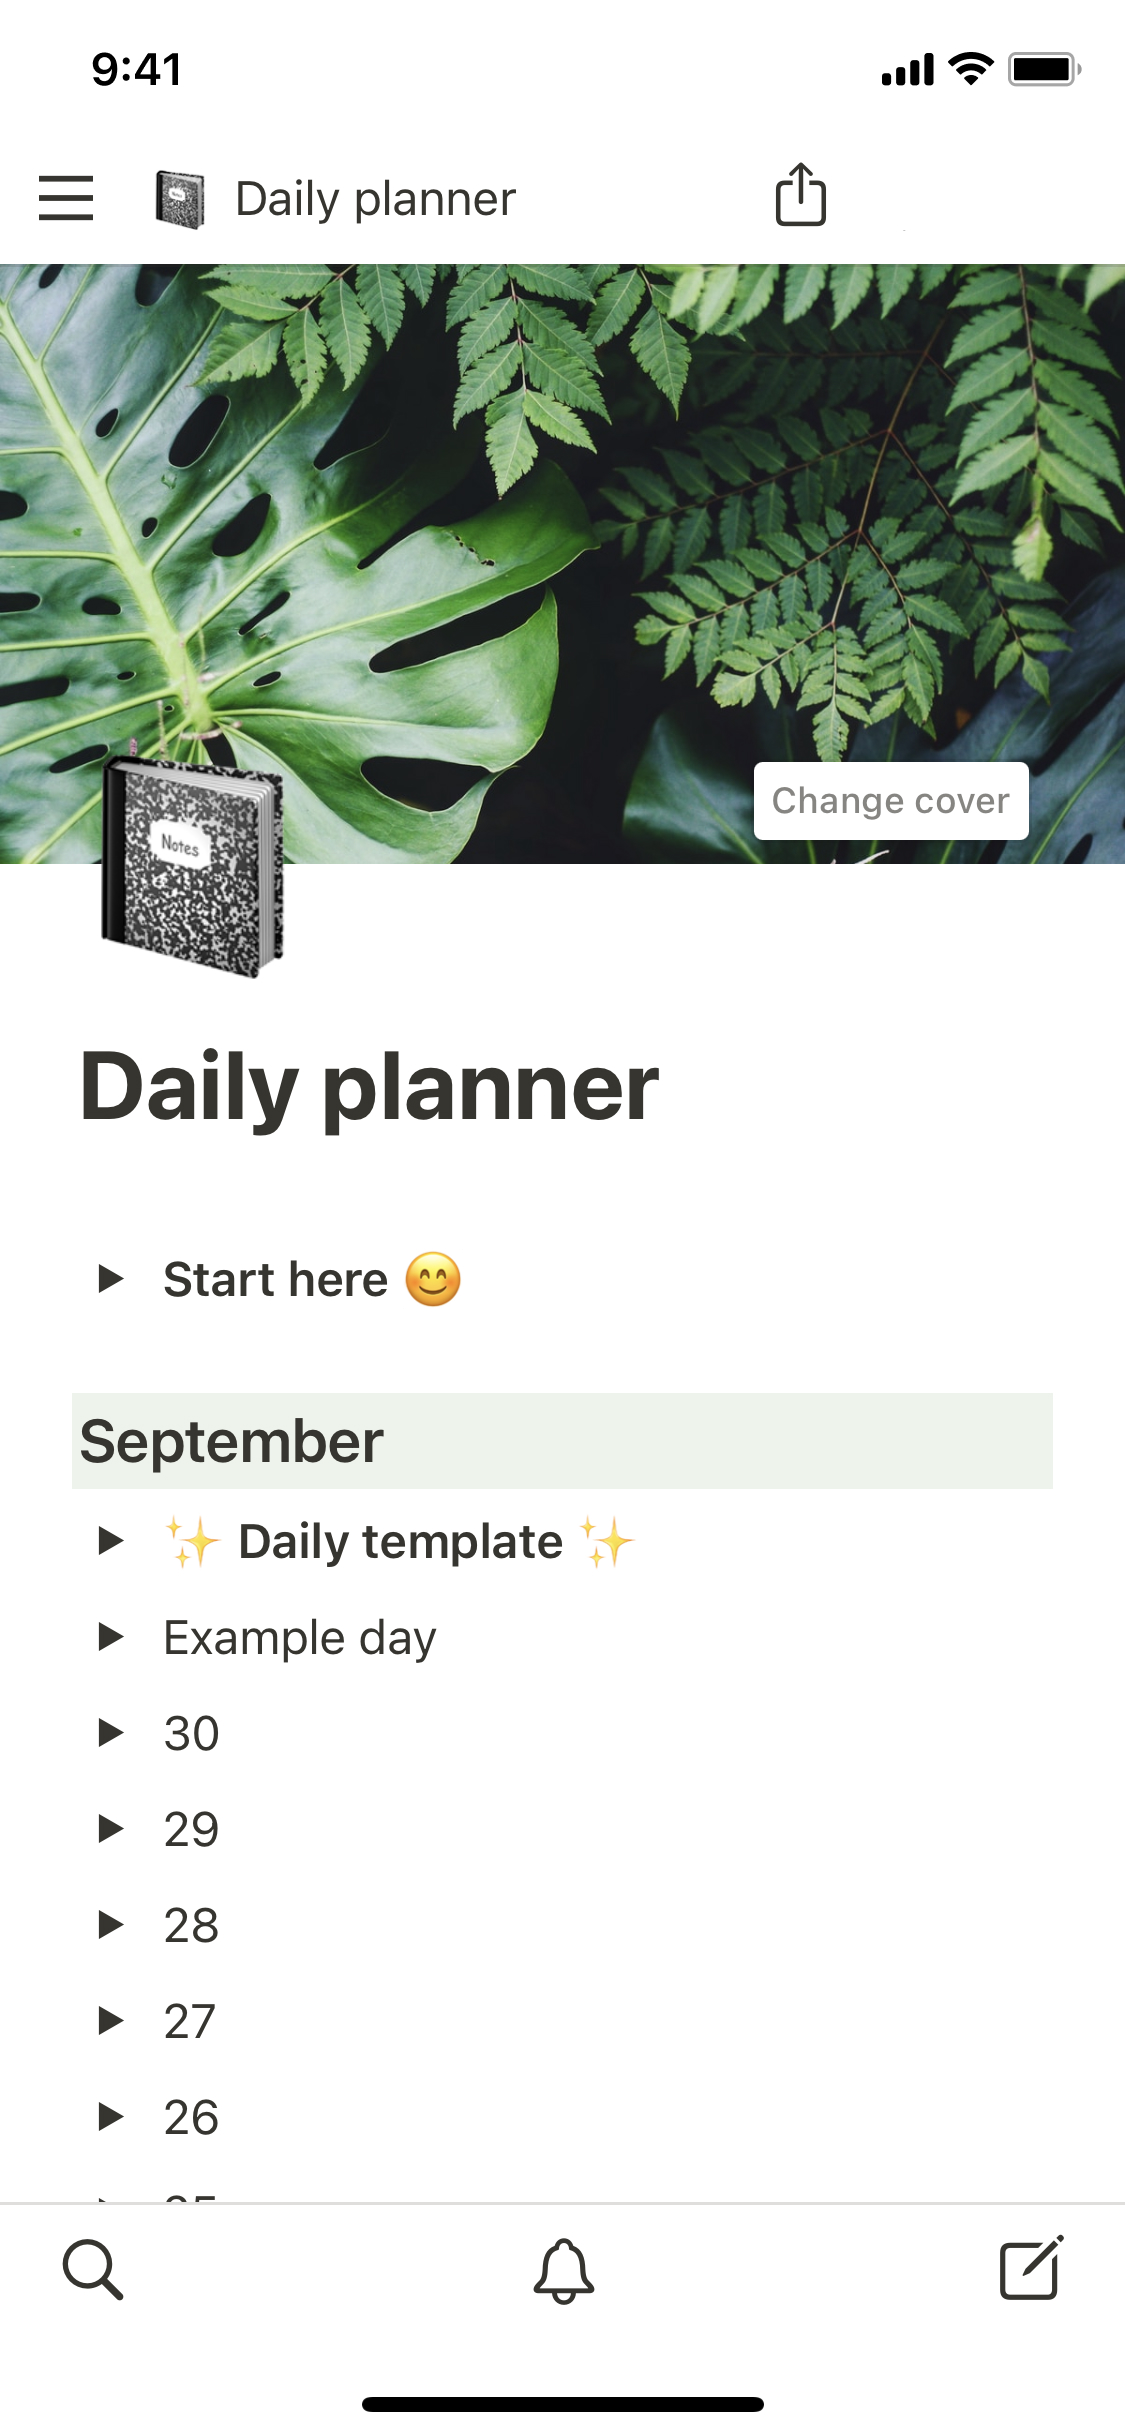 The mobile image for the Daily planner template